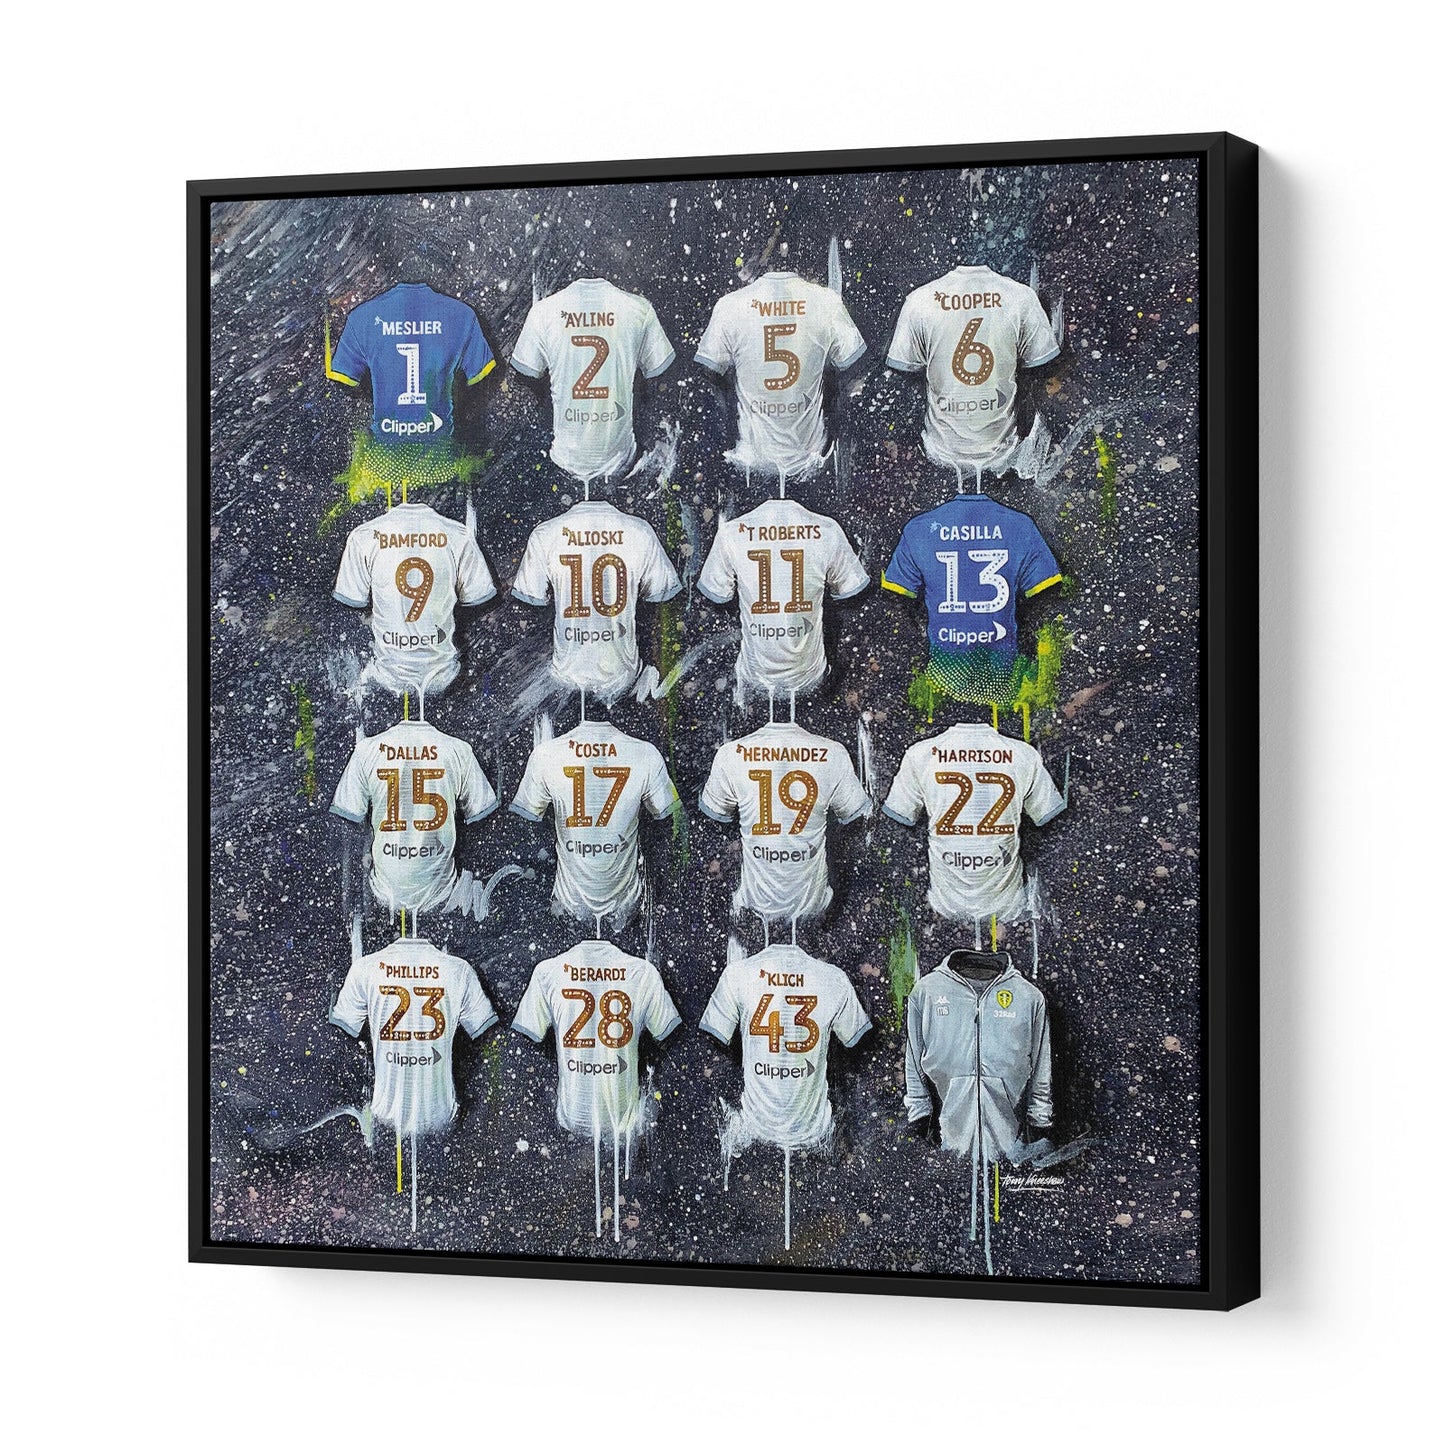 These Leeds Champions Canvases by Terry Kneeshaw celebrate the team's historic win in the 2019-2020 Championship season. Available in various sizes of 20x20, 30x30, or 40x40, these canvases can be purchased framed or unframed with a black floating frame. Featuring vibrant colors and striking imagery, these canvases are perfect for any dedicated Leeds United fan looking to showcase their team spirit in their home or office.